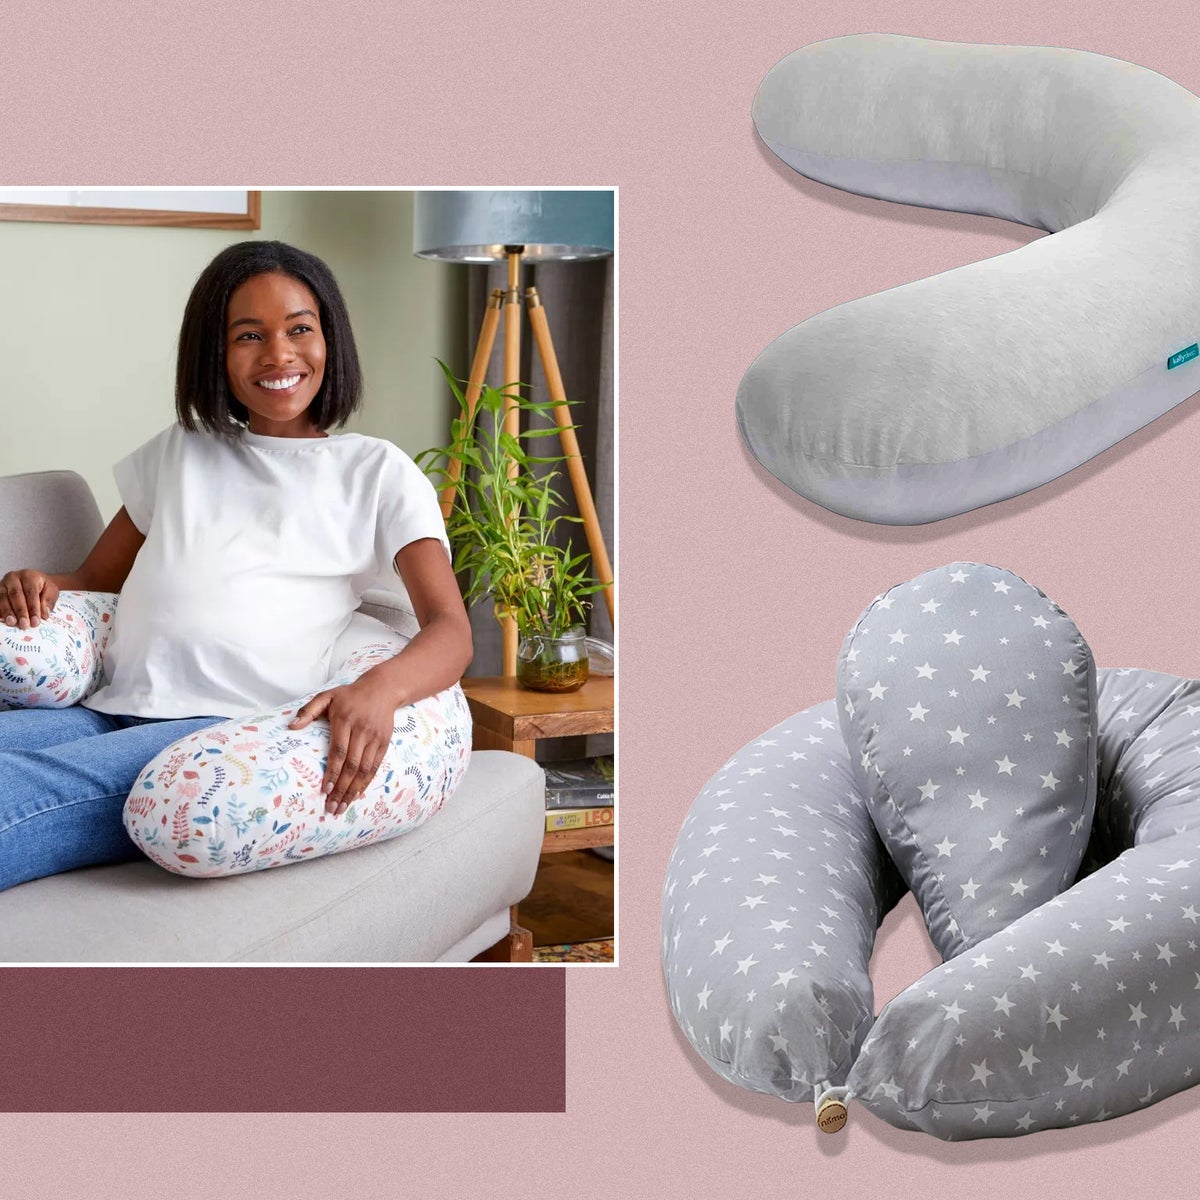 https://static.independent.co.uk/2023/05/24/16/pregnancy%20pillows%20indybest%20copy.jpg?width=1200&height=1200&fit=crop